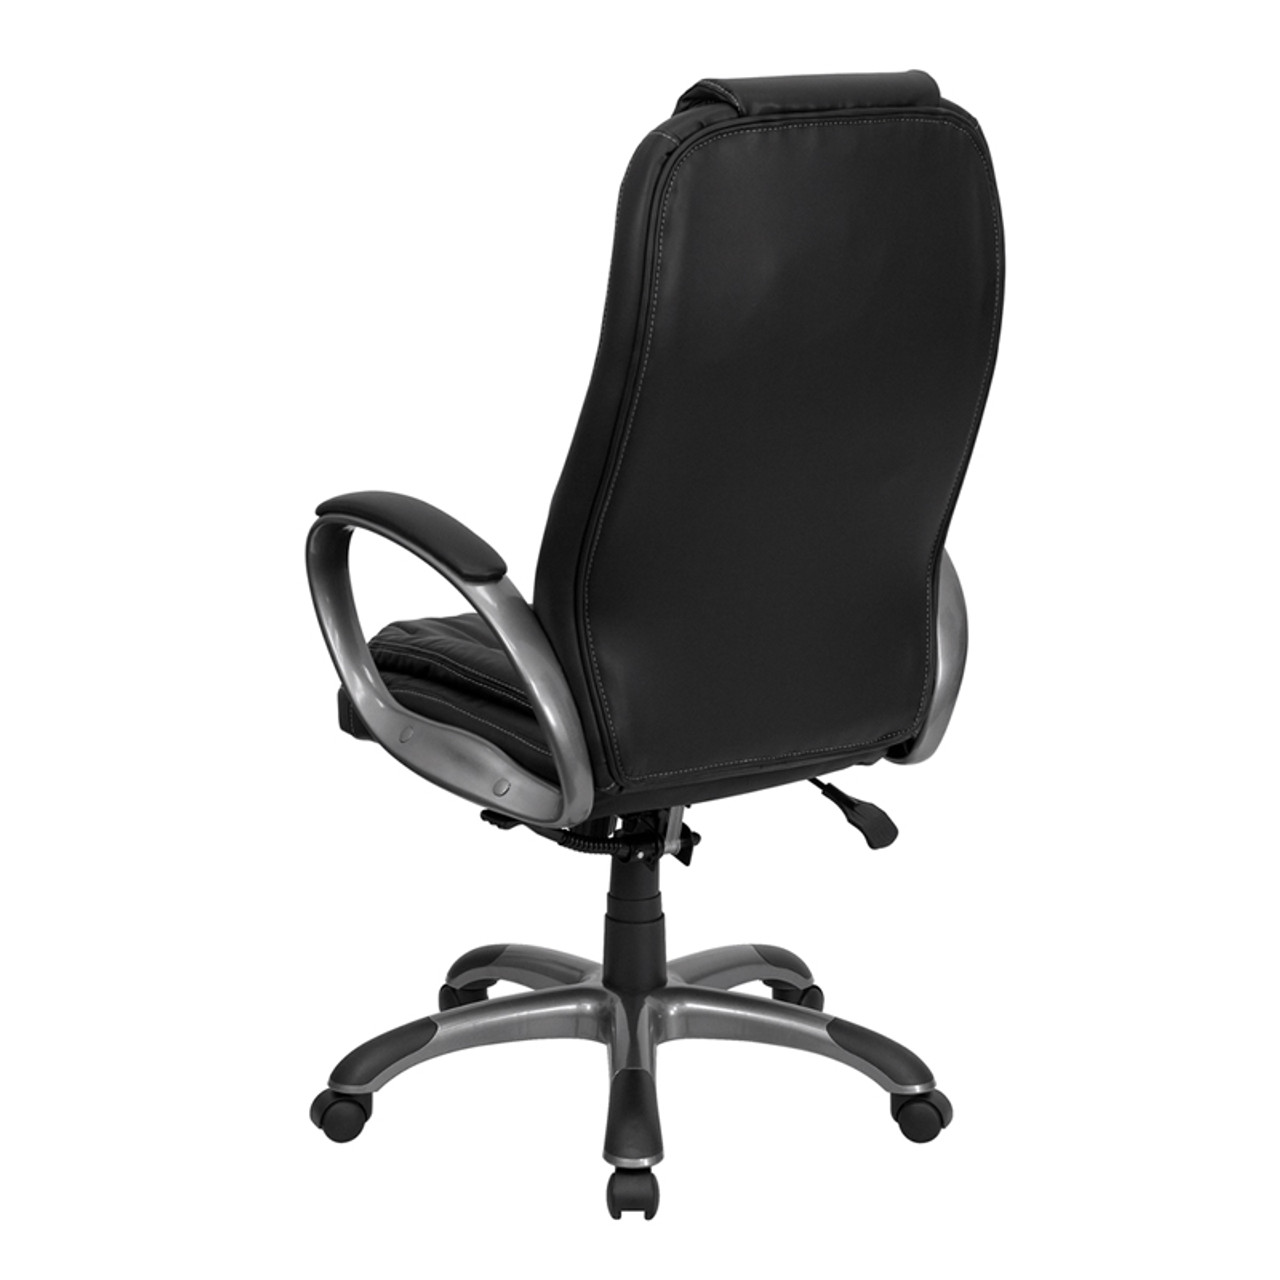 High Back Black Leather Executive Swivel Office Chair , #FF-0177-14